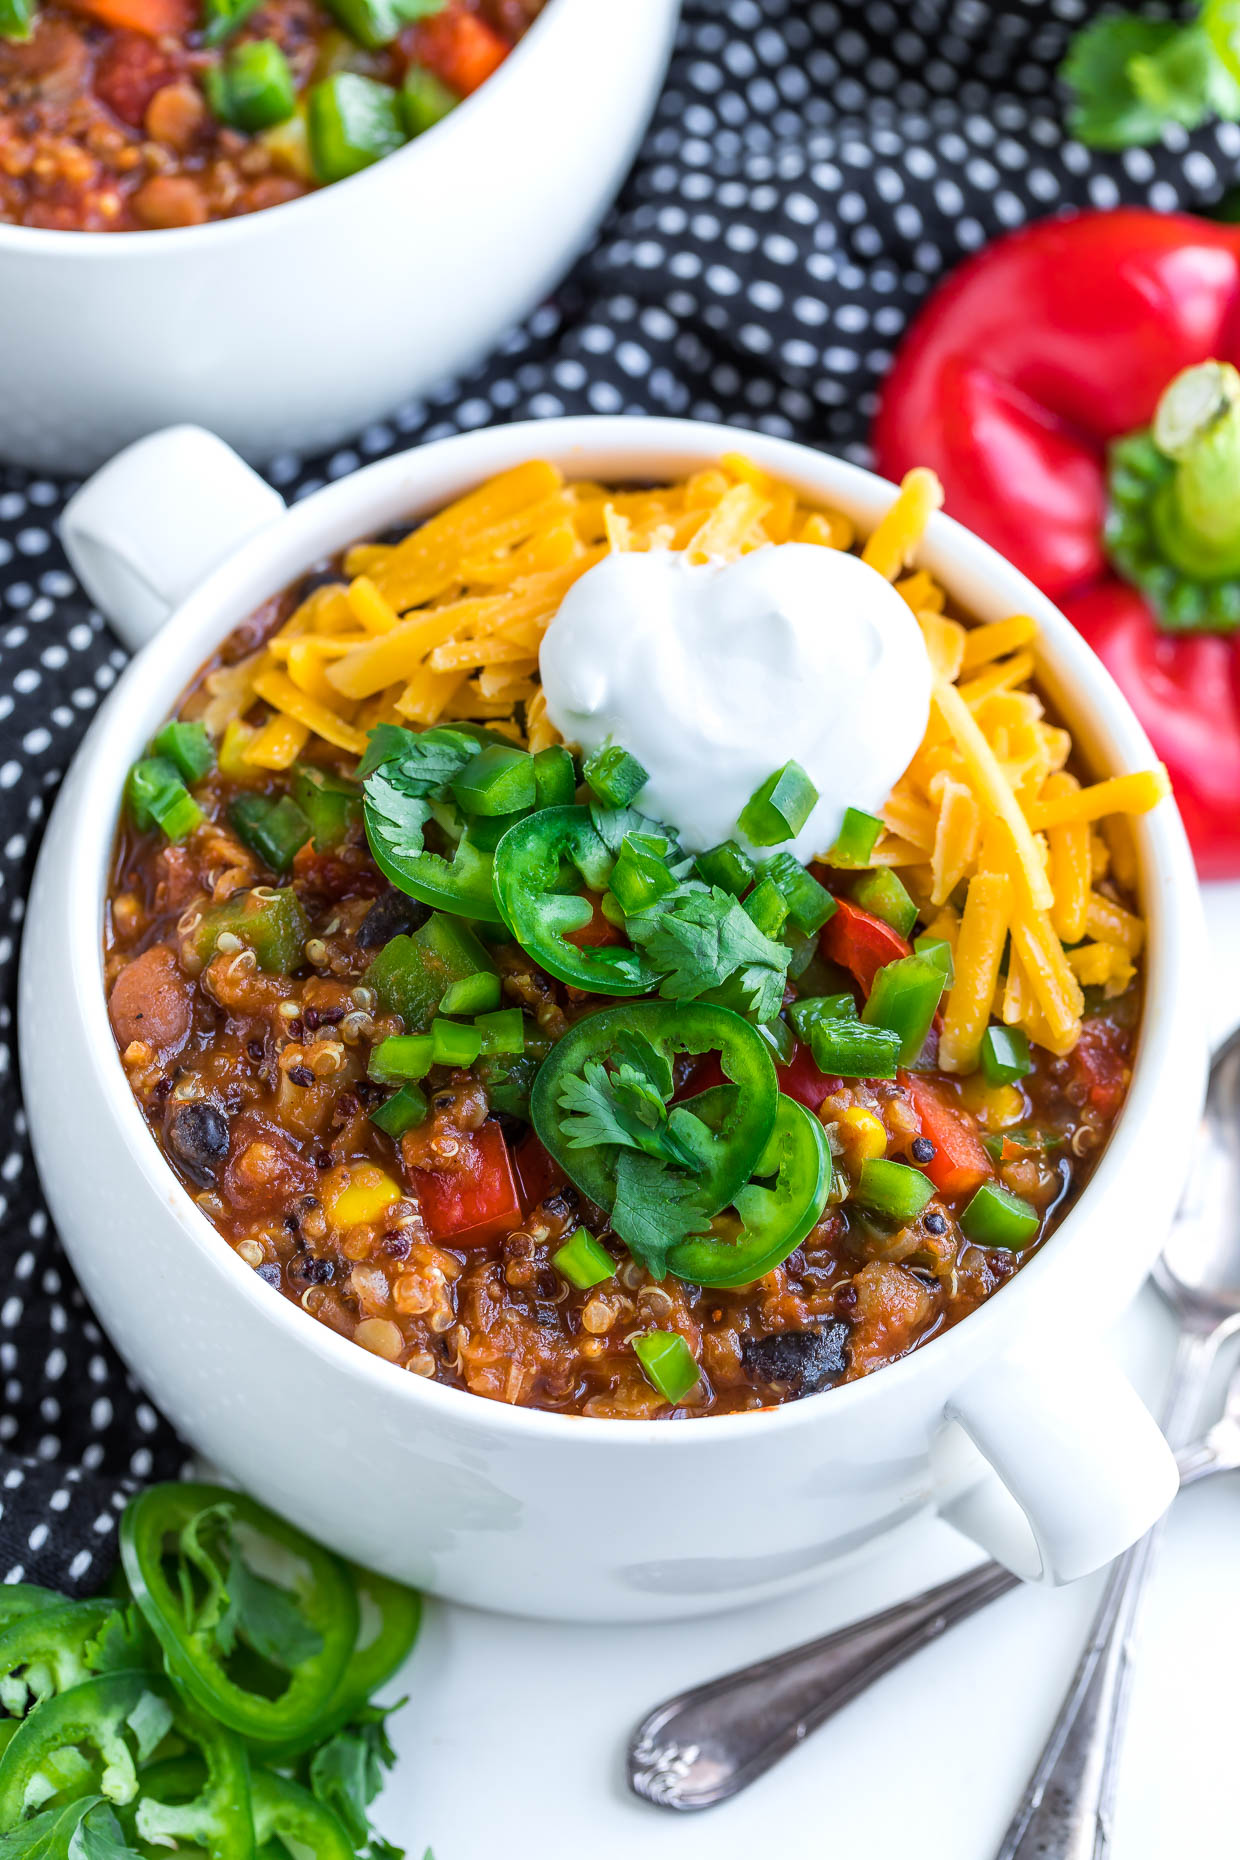 This Instant Pot Vegetarian Quinoa Chili is a comfort food classic with a healthy plant-based twist! To make things user-easy I've even included slow cooker and stove-top instructions too. Game on!